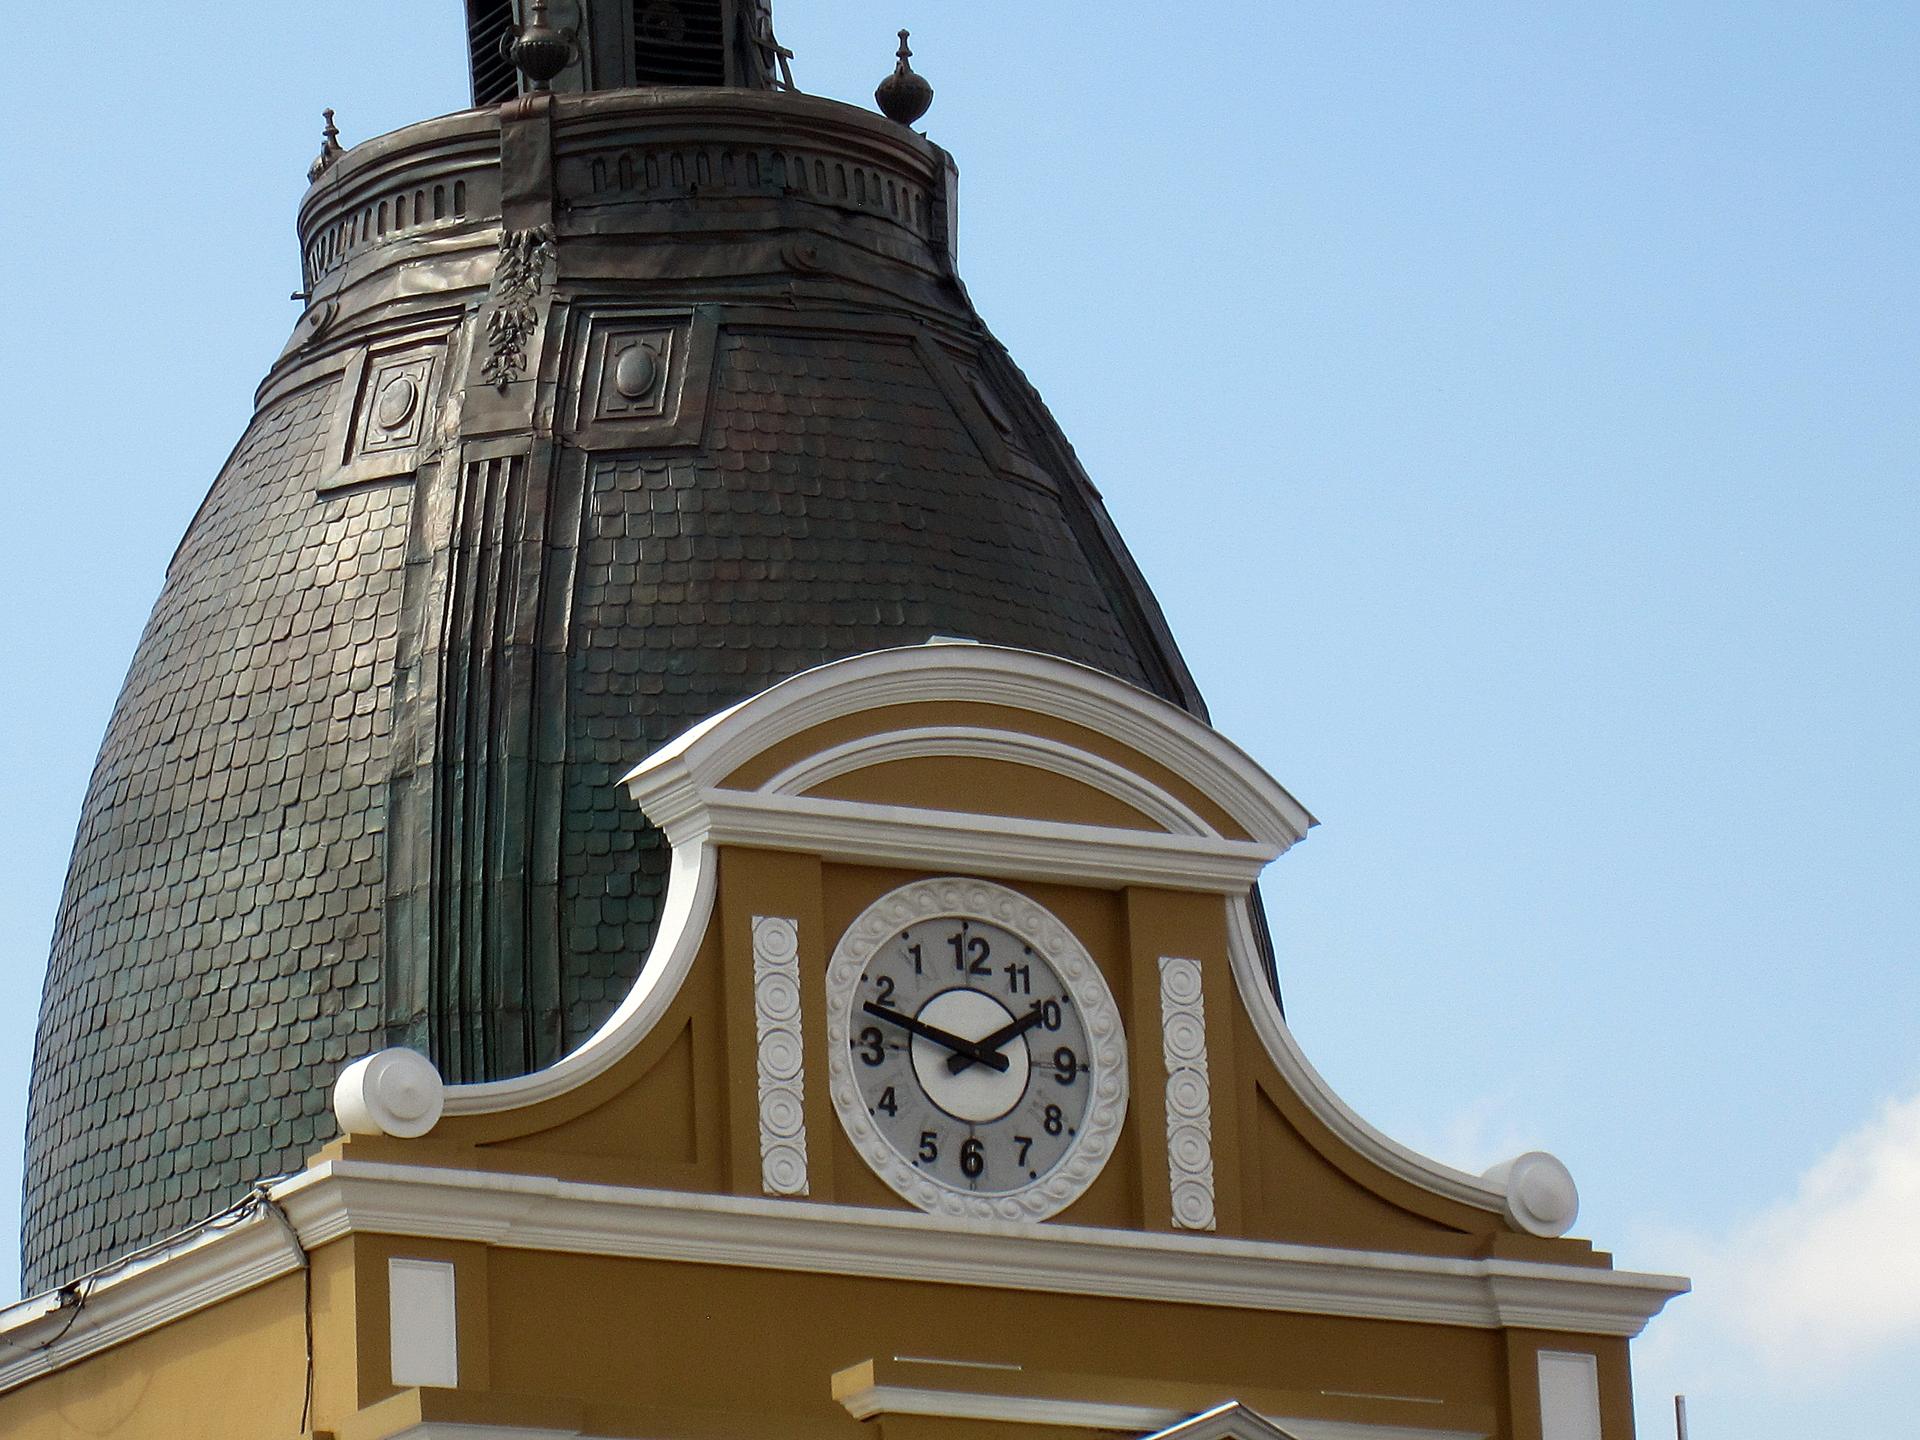 The clock on the facade Bolivia's Congress building in La Paz, Bolivia. President Evo Morales had the clock turned backwards in 2014 and dubbed it the 